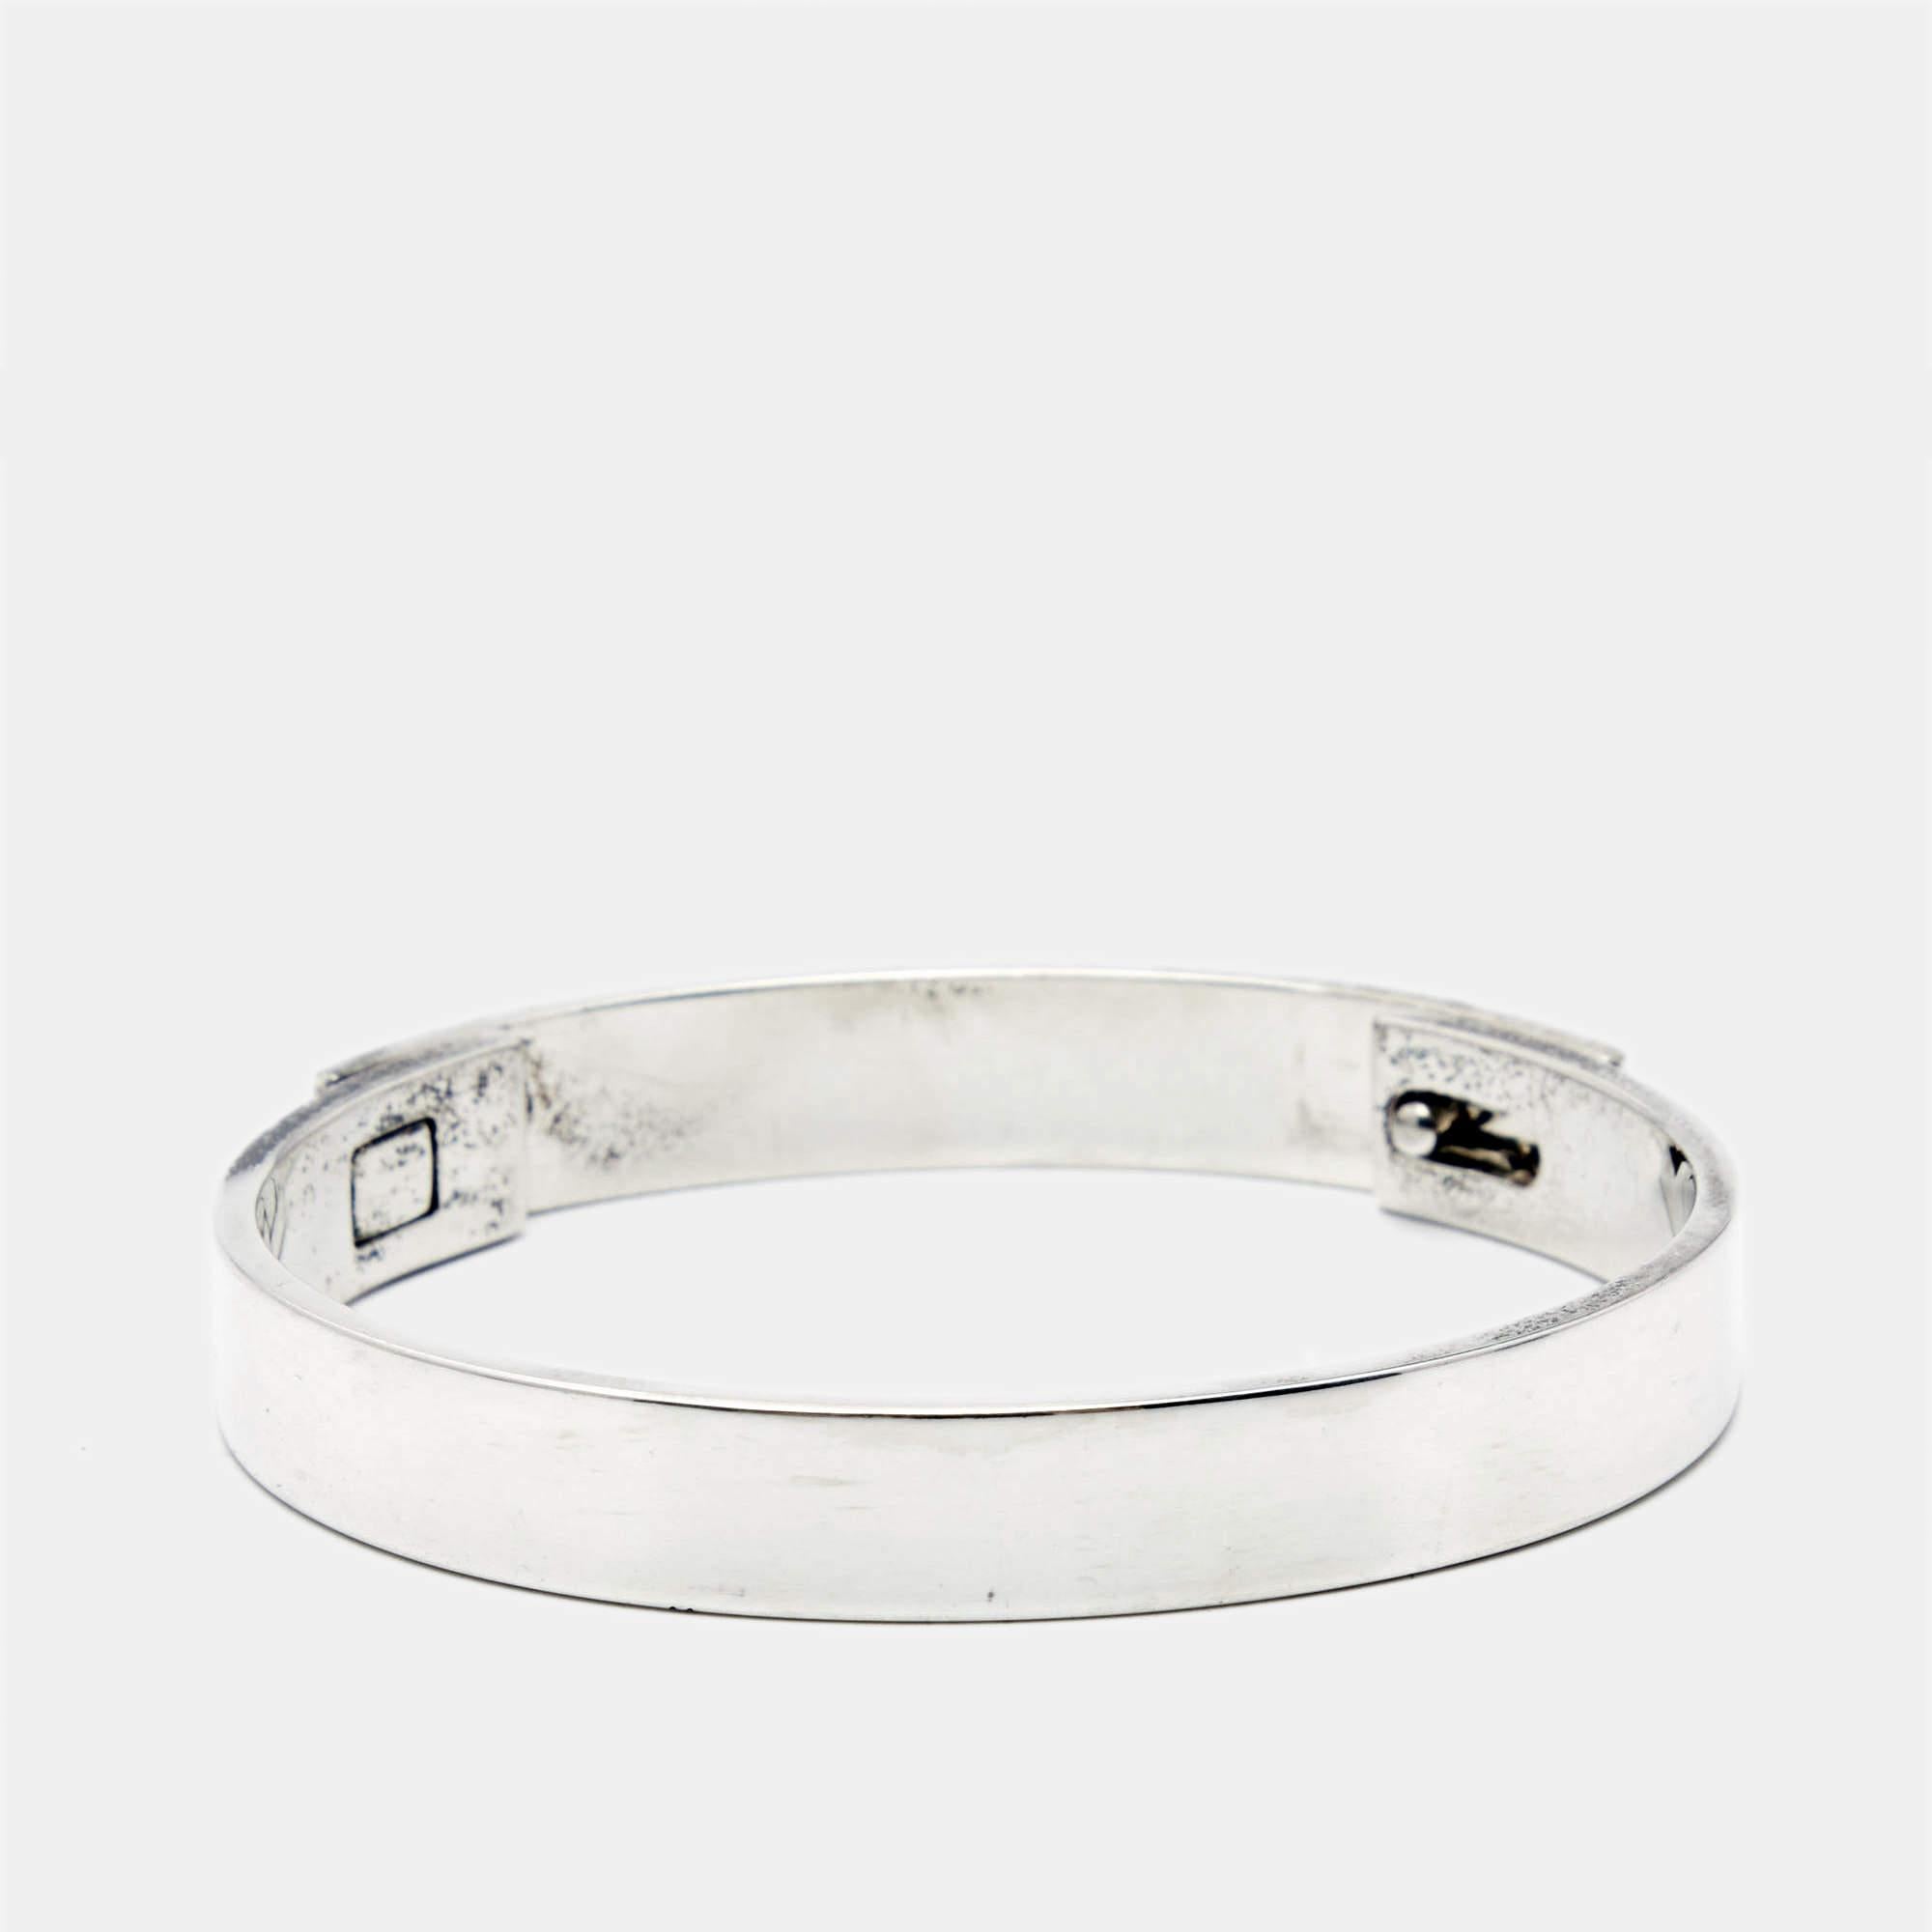 The choice of the best materials coupled with heritage artisanship makes this Hermes silver bracelet a creation worth cherishing. It sits gracefully on any wrist.

